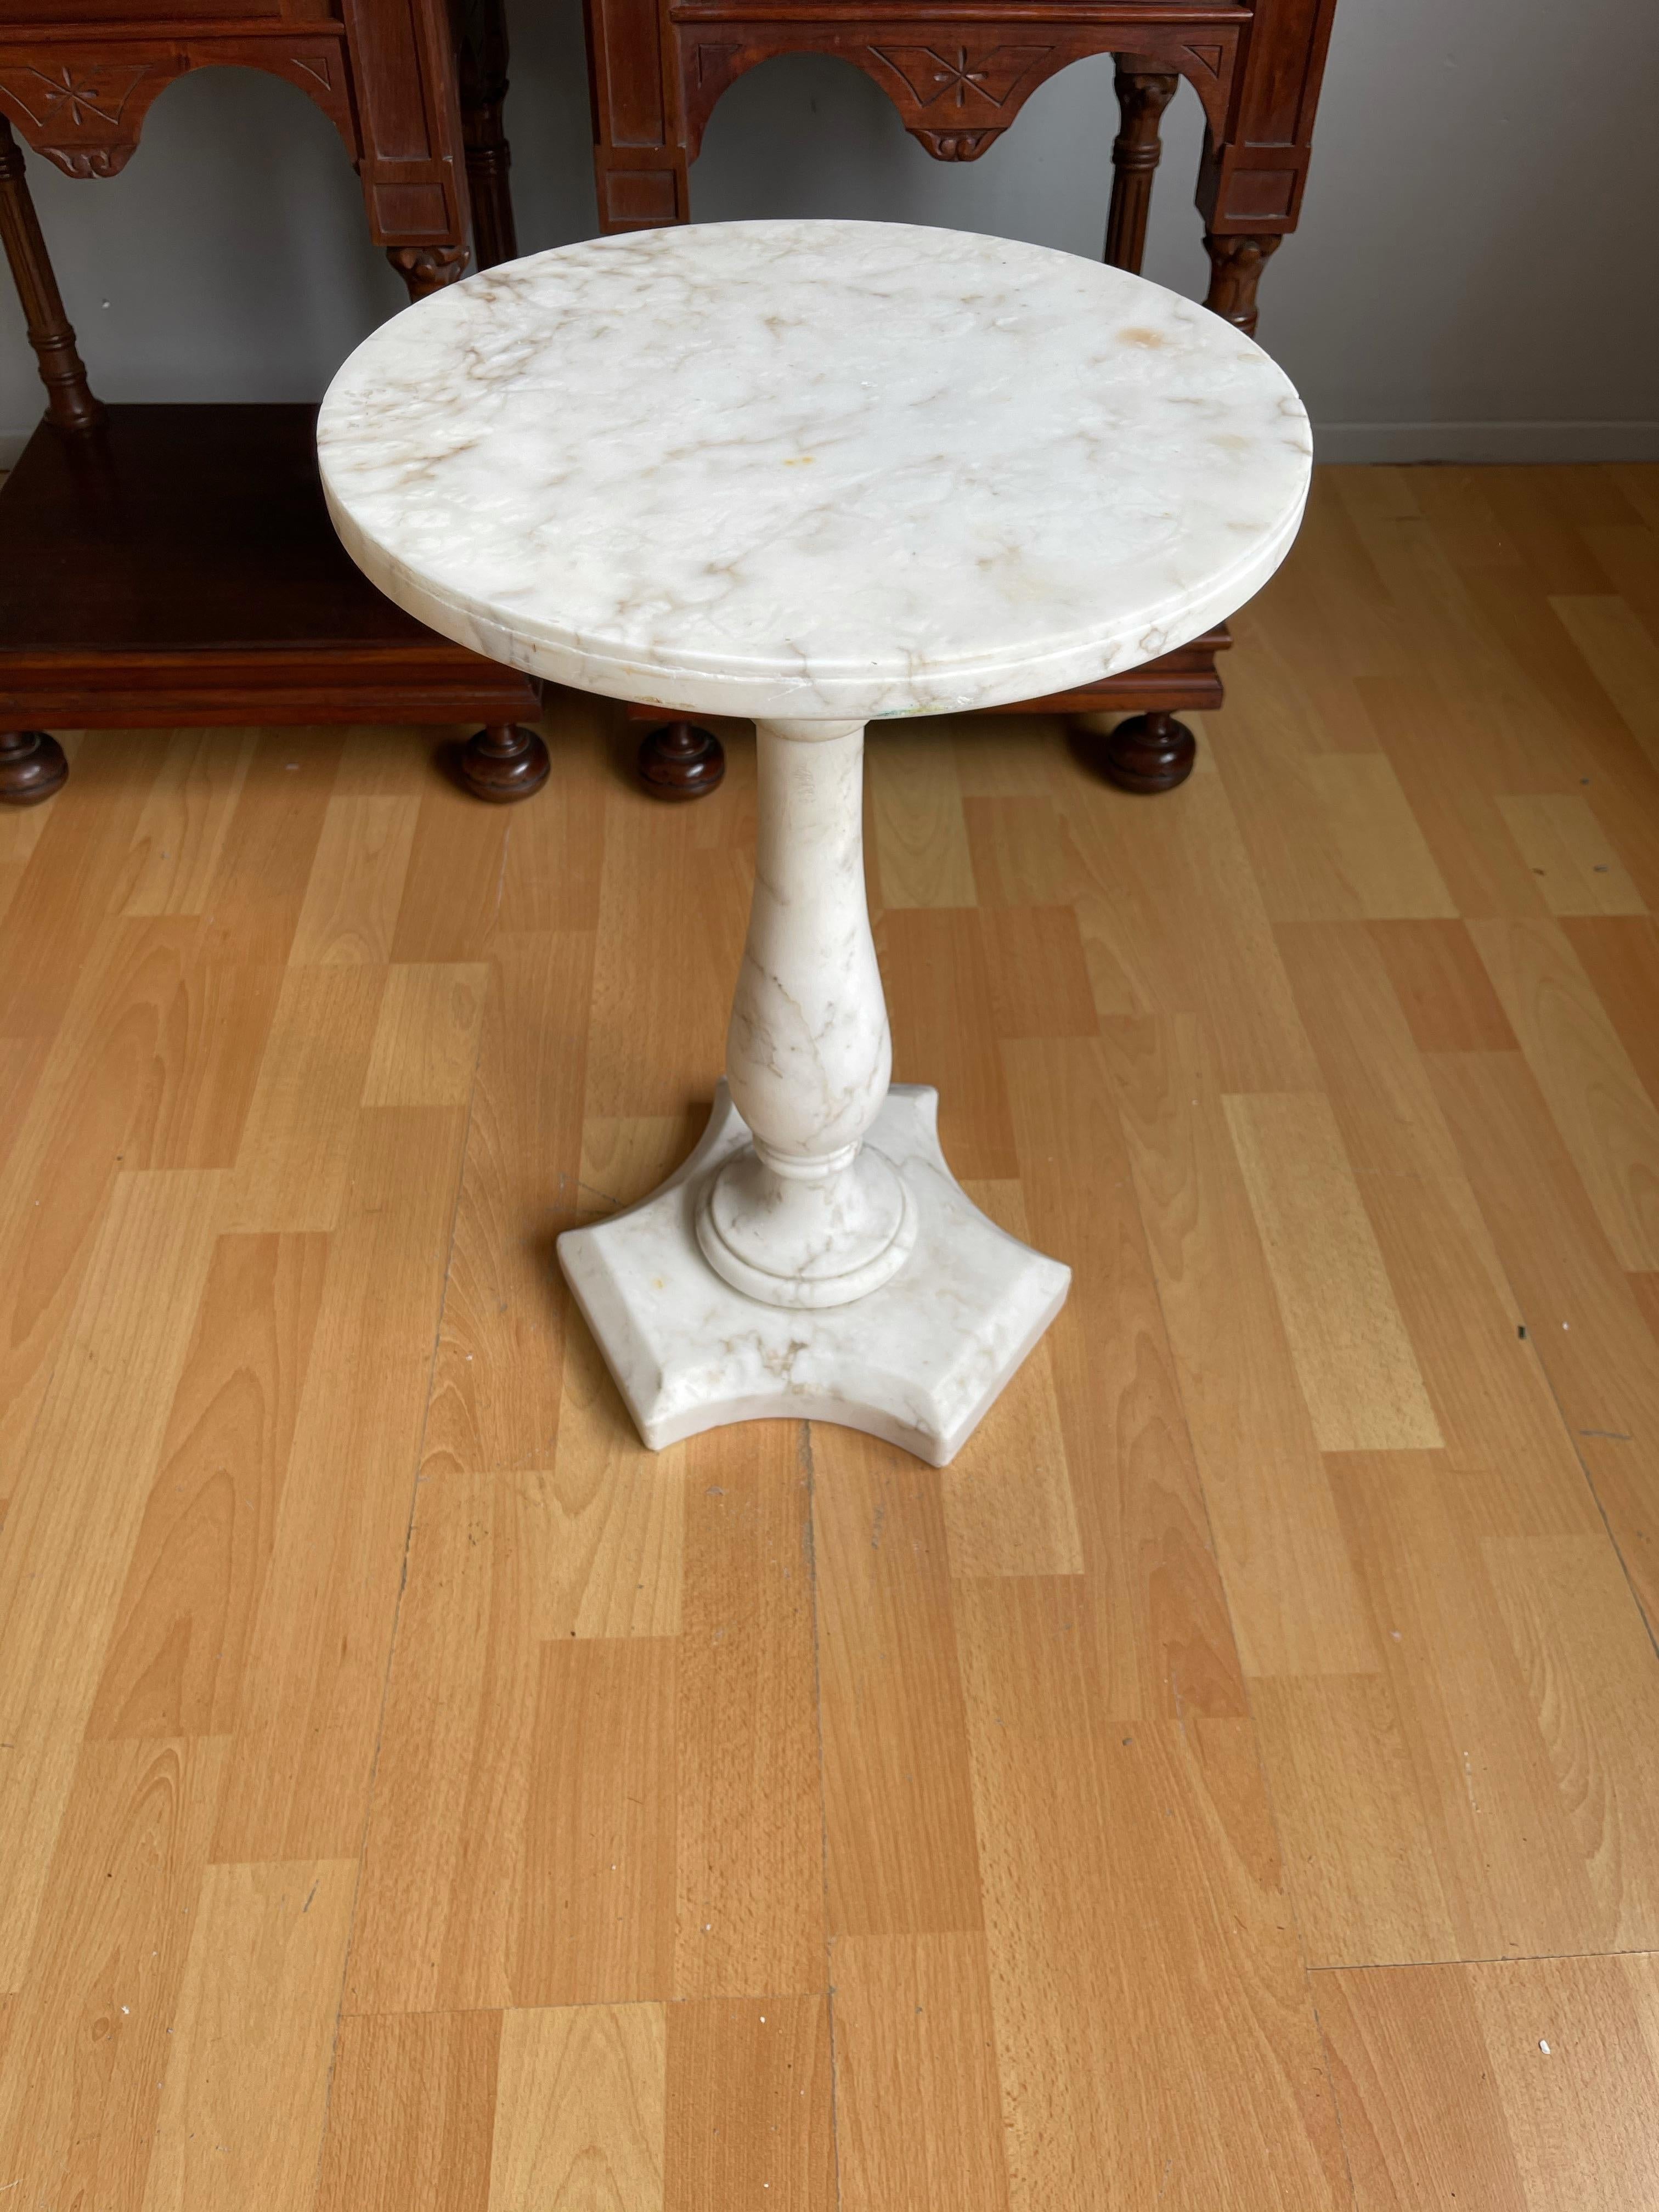 Italian Design Midcentury Modern White Carrara Marble Pedestal Stand / End Table For Sale 4